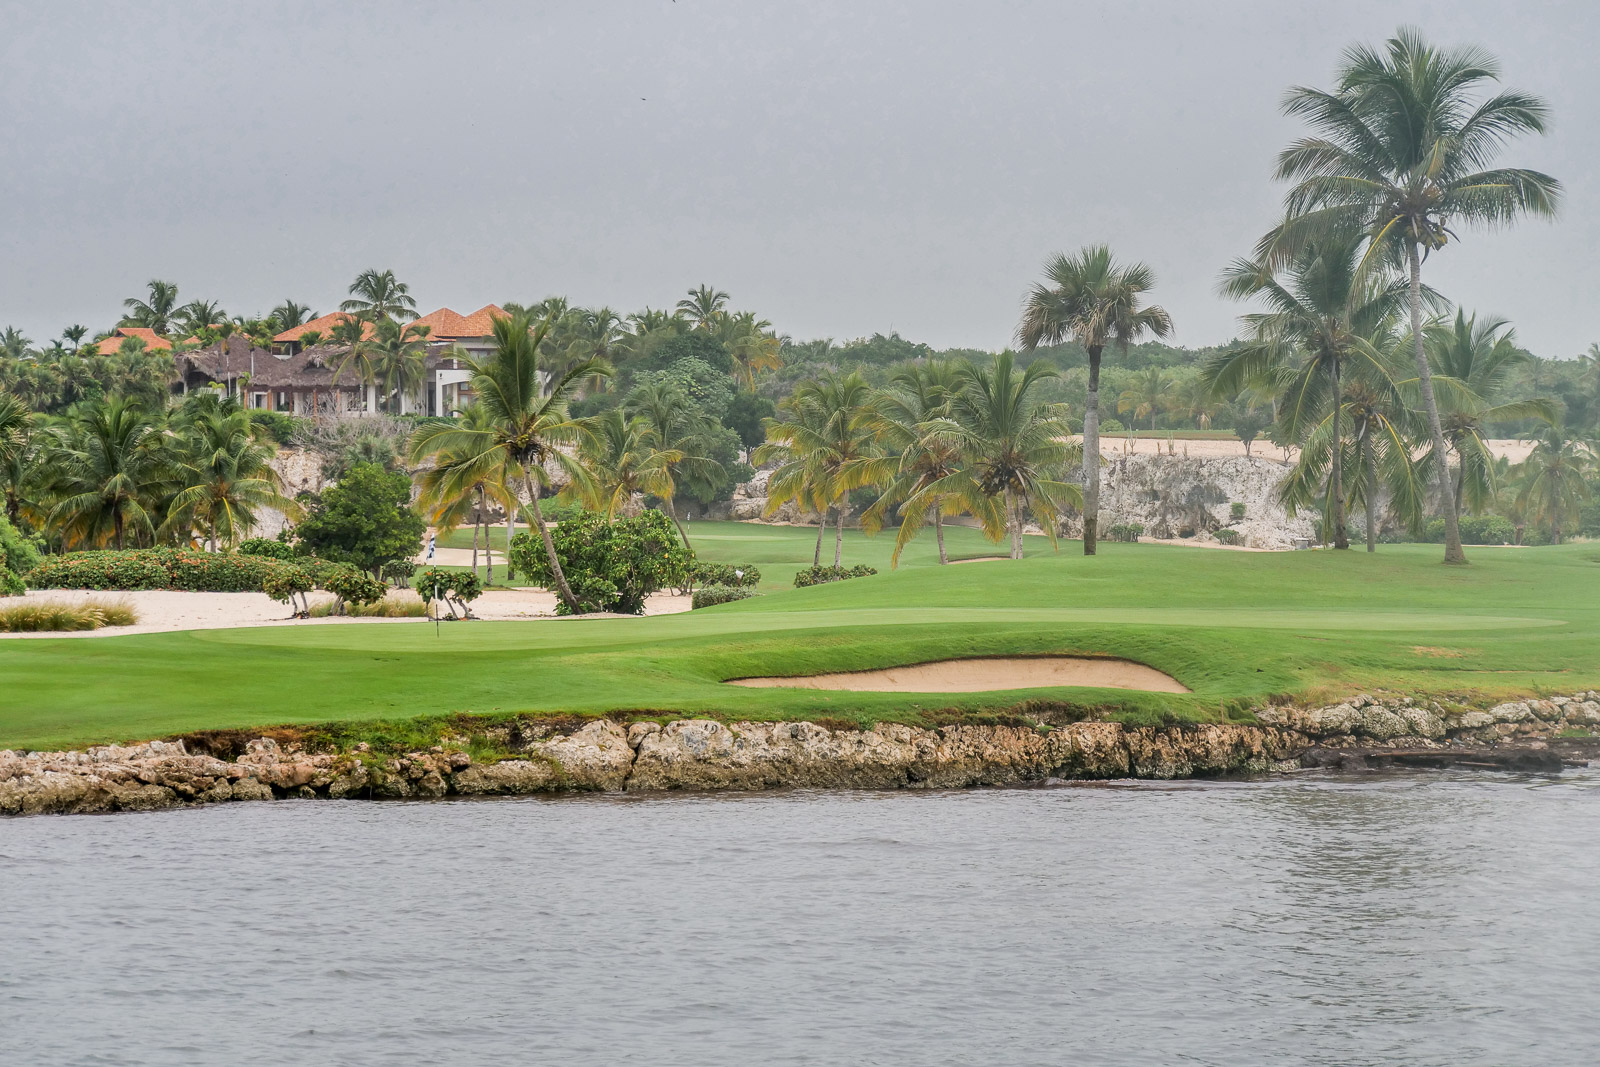 The par 3, 4th hole at Punta Espada with water in front of the green.